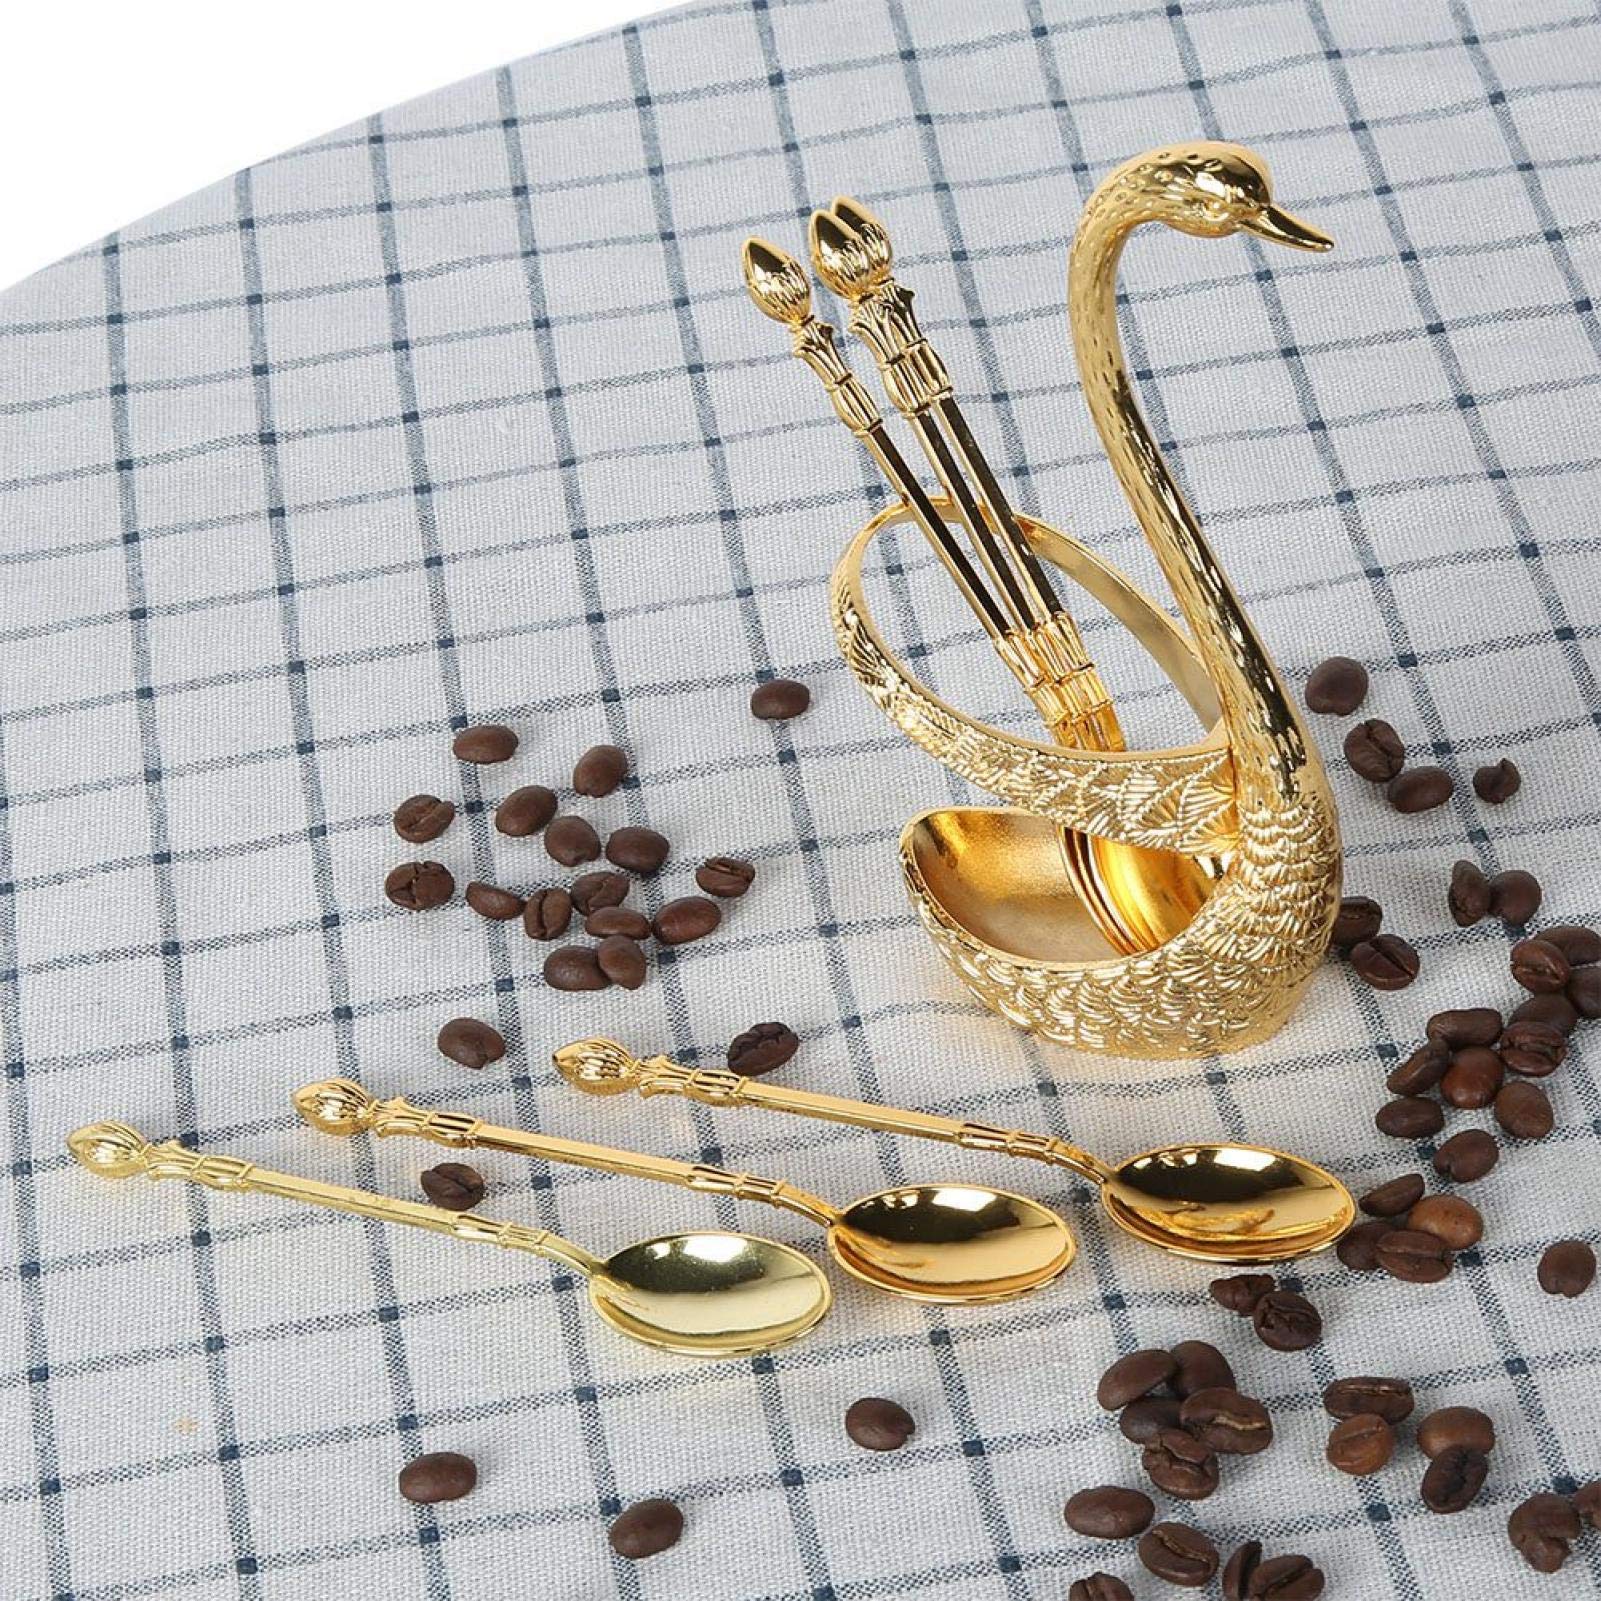 Oumefar Dessert Spoons, 10pcs Premium Food Grade Stainless Steel 4.7 Coffee Spoon with Decorative Swan Base Holder, Creative Gold Dessert Spoons and Swan Shape Holder,for Coffee Dessert Ice Cream Cake